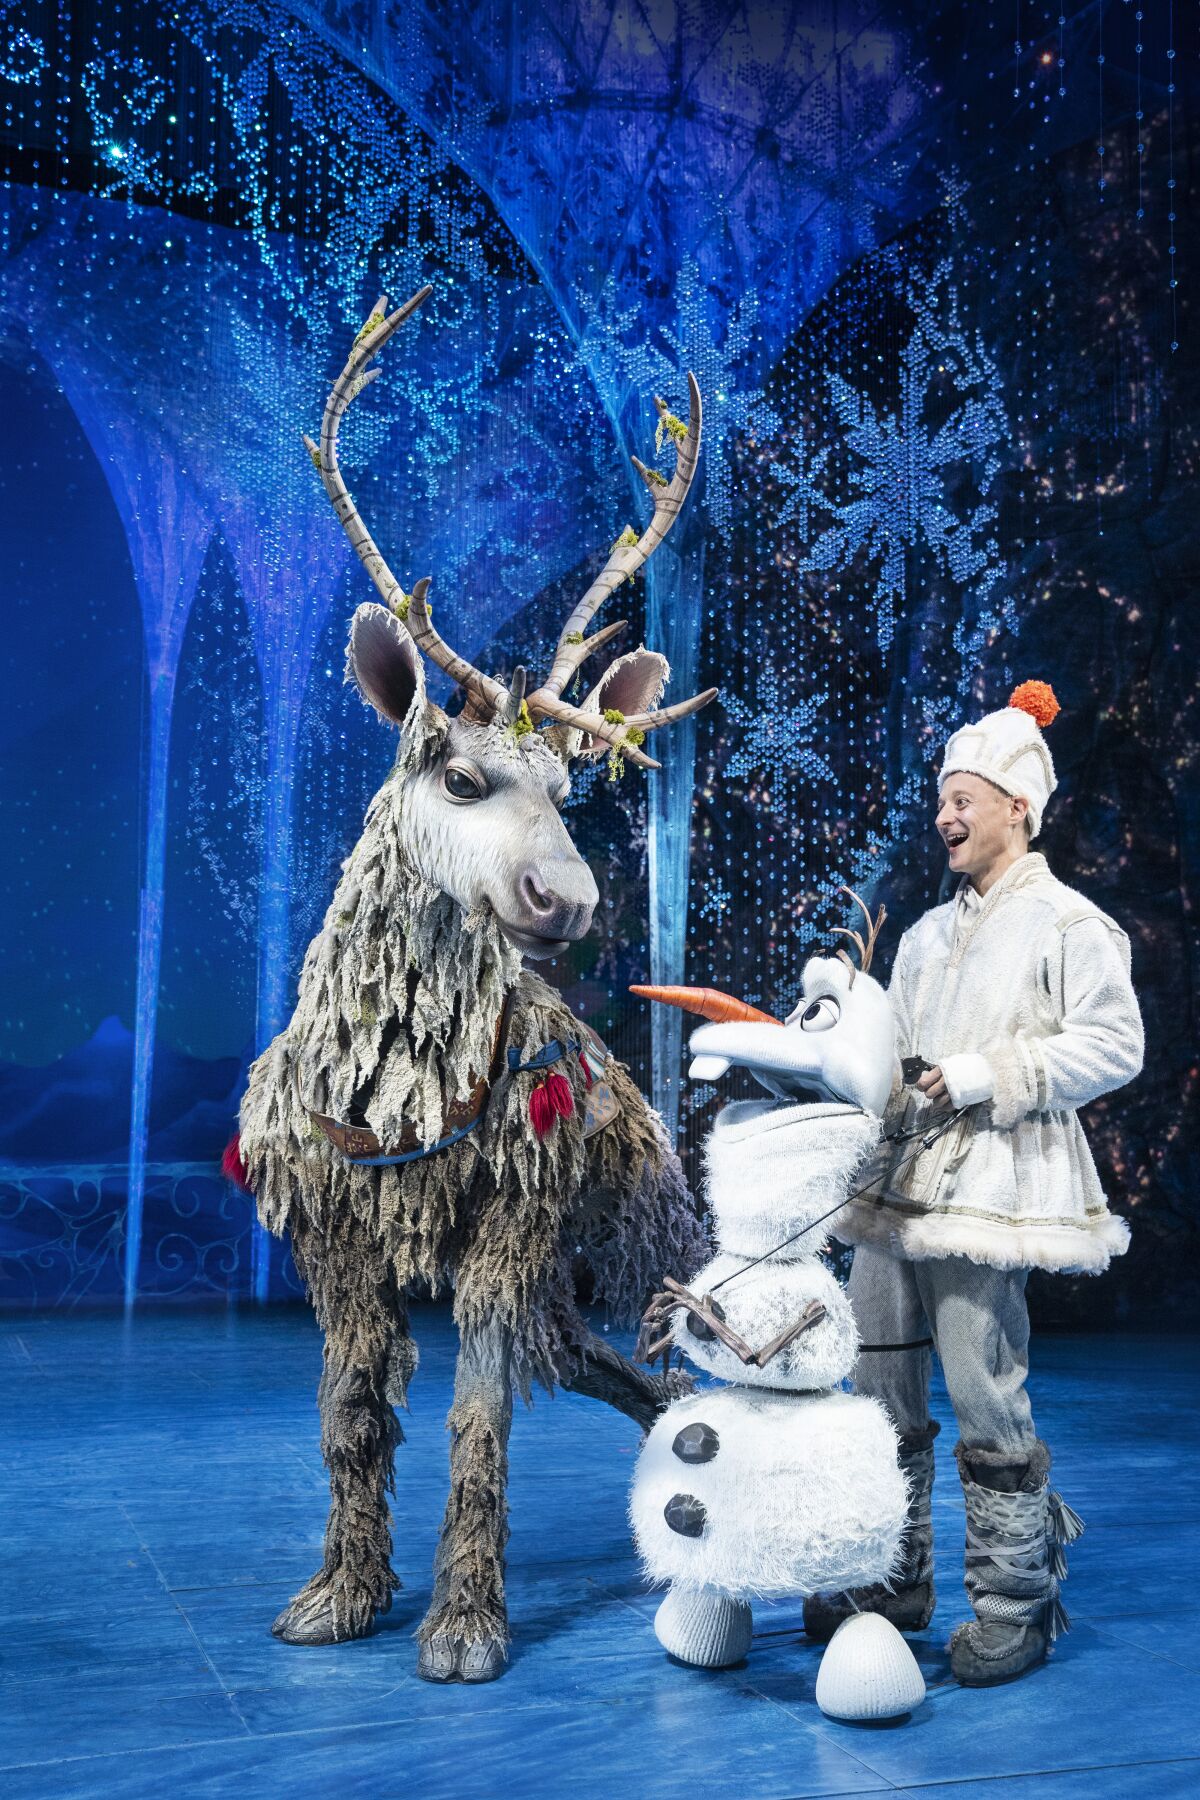 The characters of Sven the reindeer and Olaf the snowman in "Frozen the Musical."